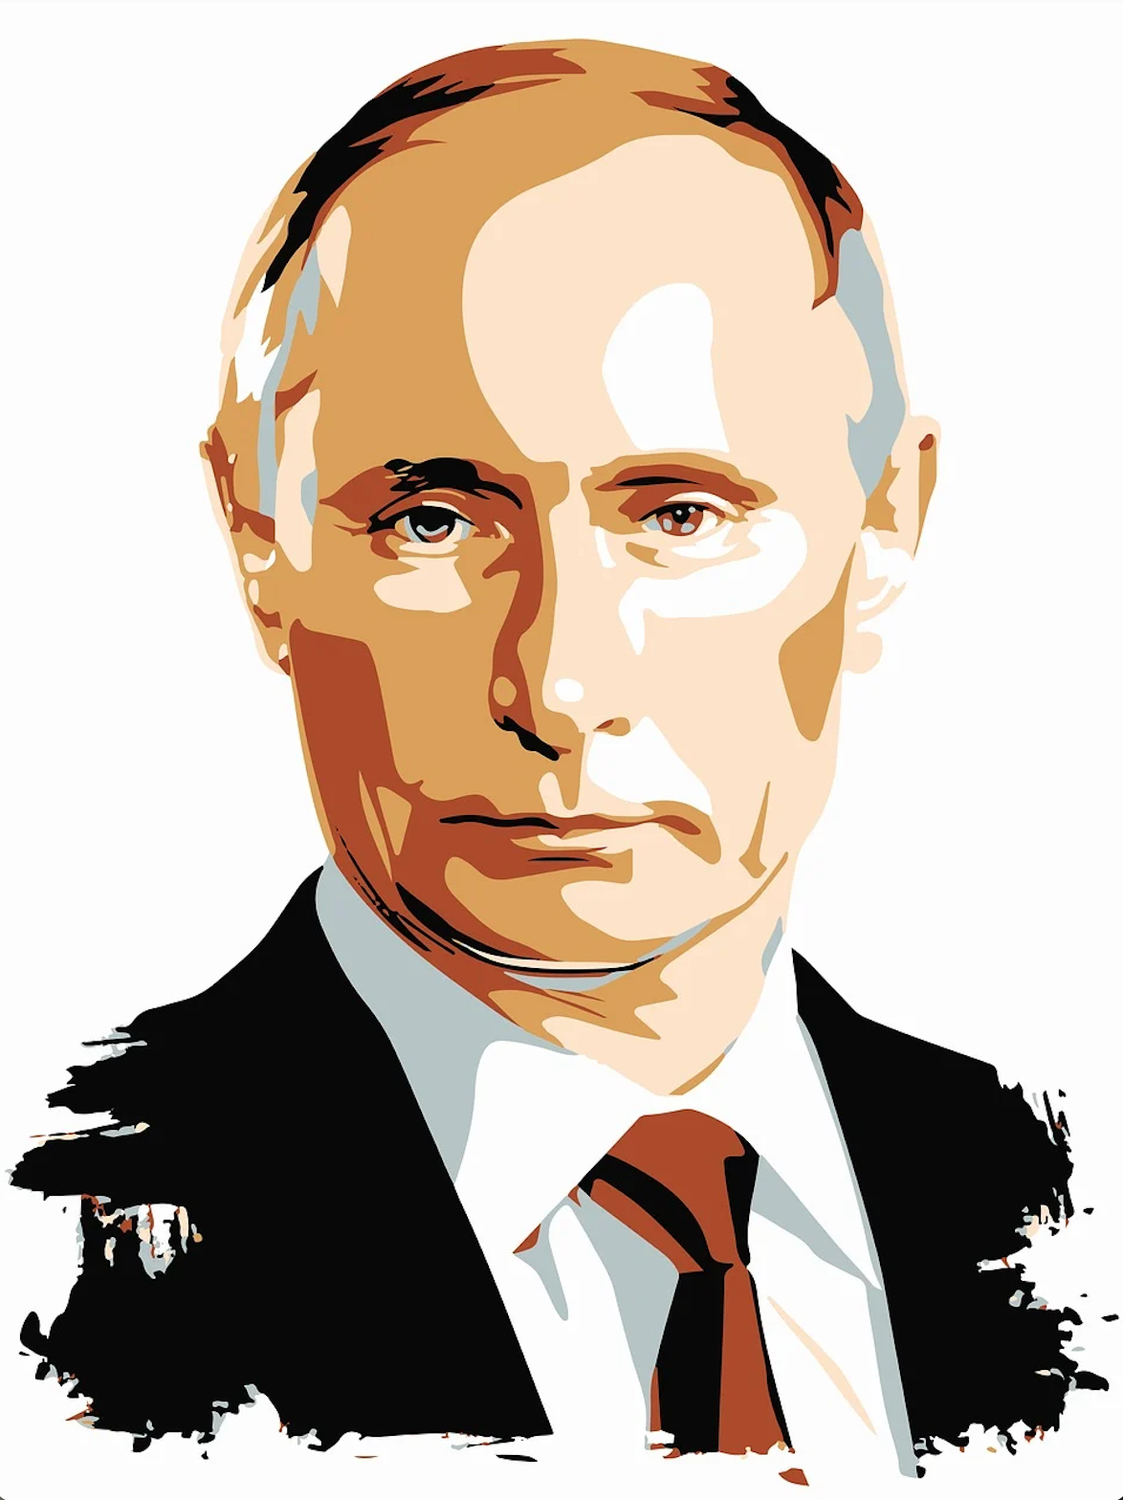 Putin appears to live in a parallel reality